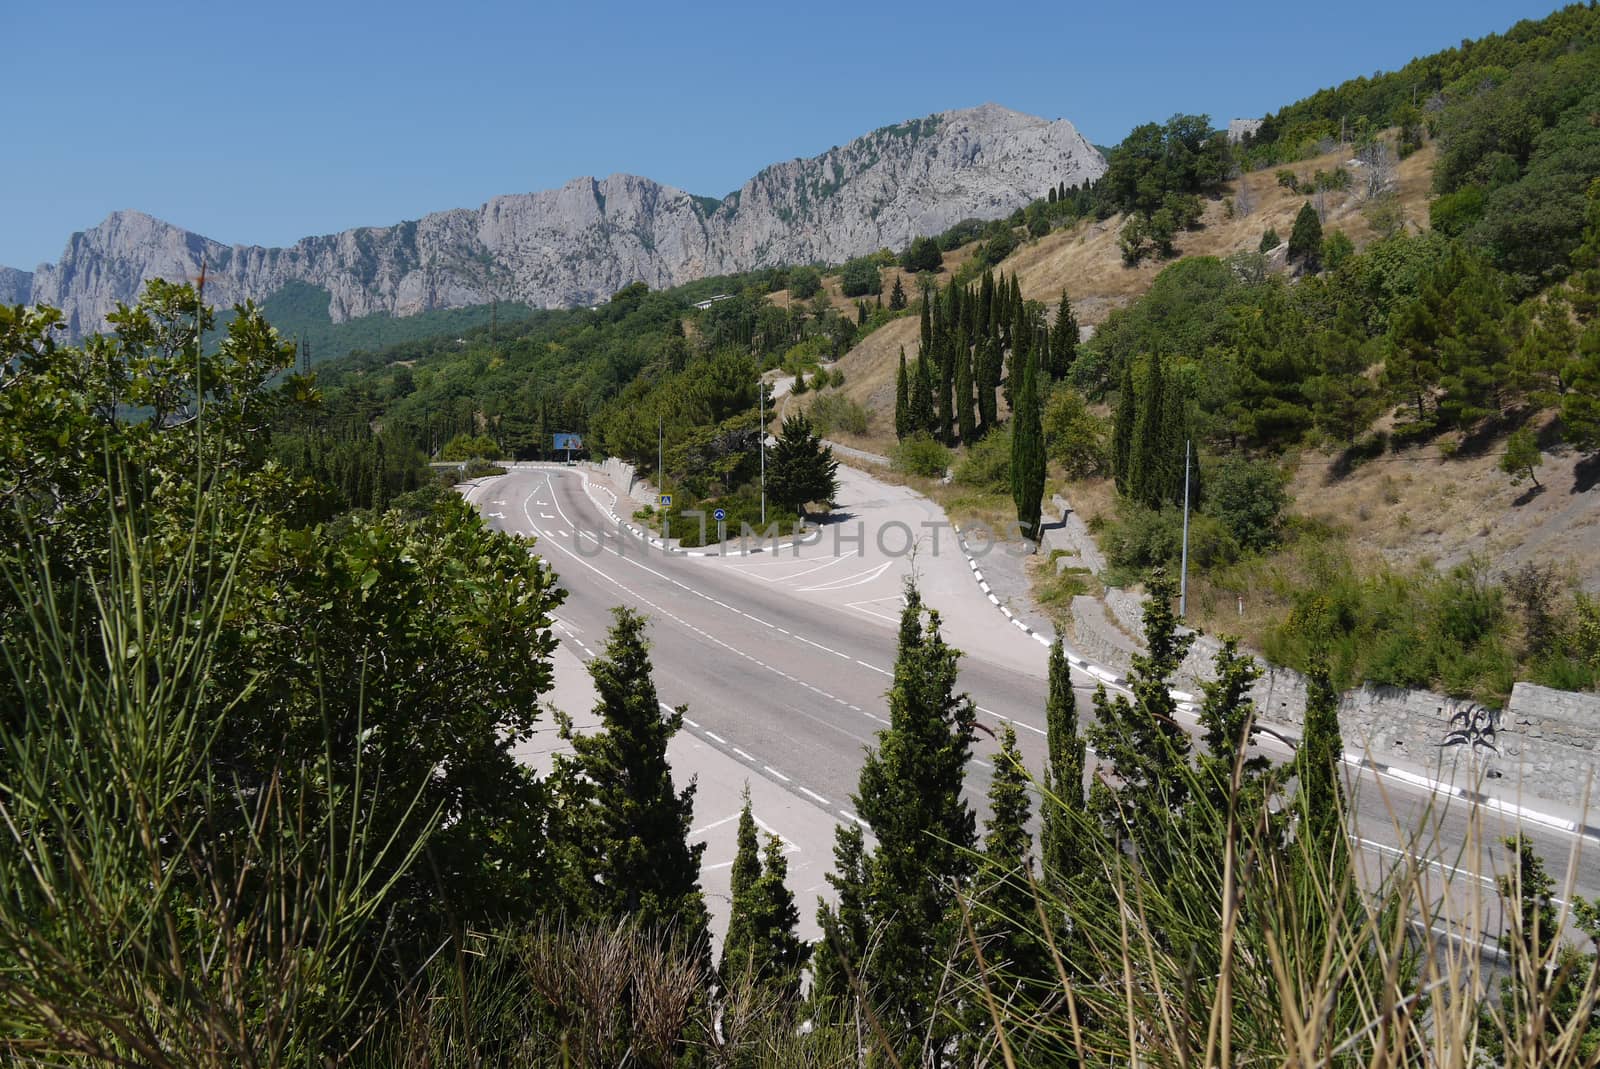 the road is twisted on the background of the steep cliffs surrounded by dense forest by Adamchuk